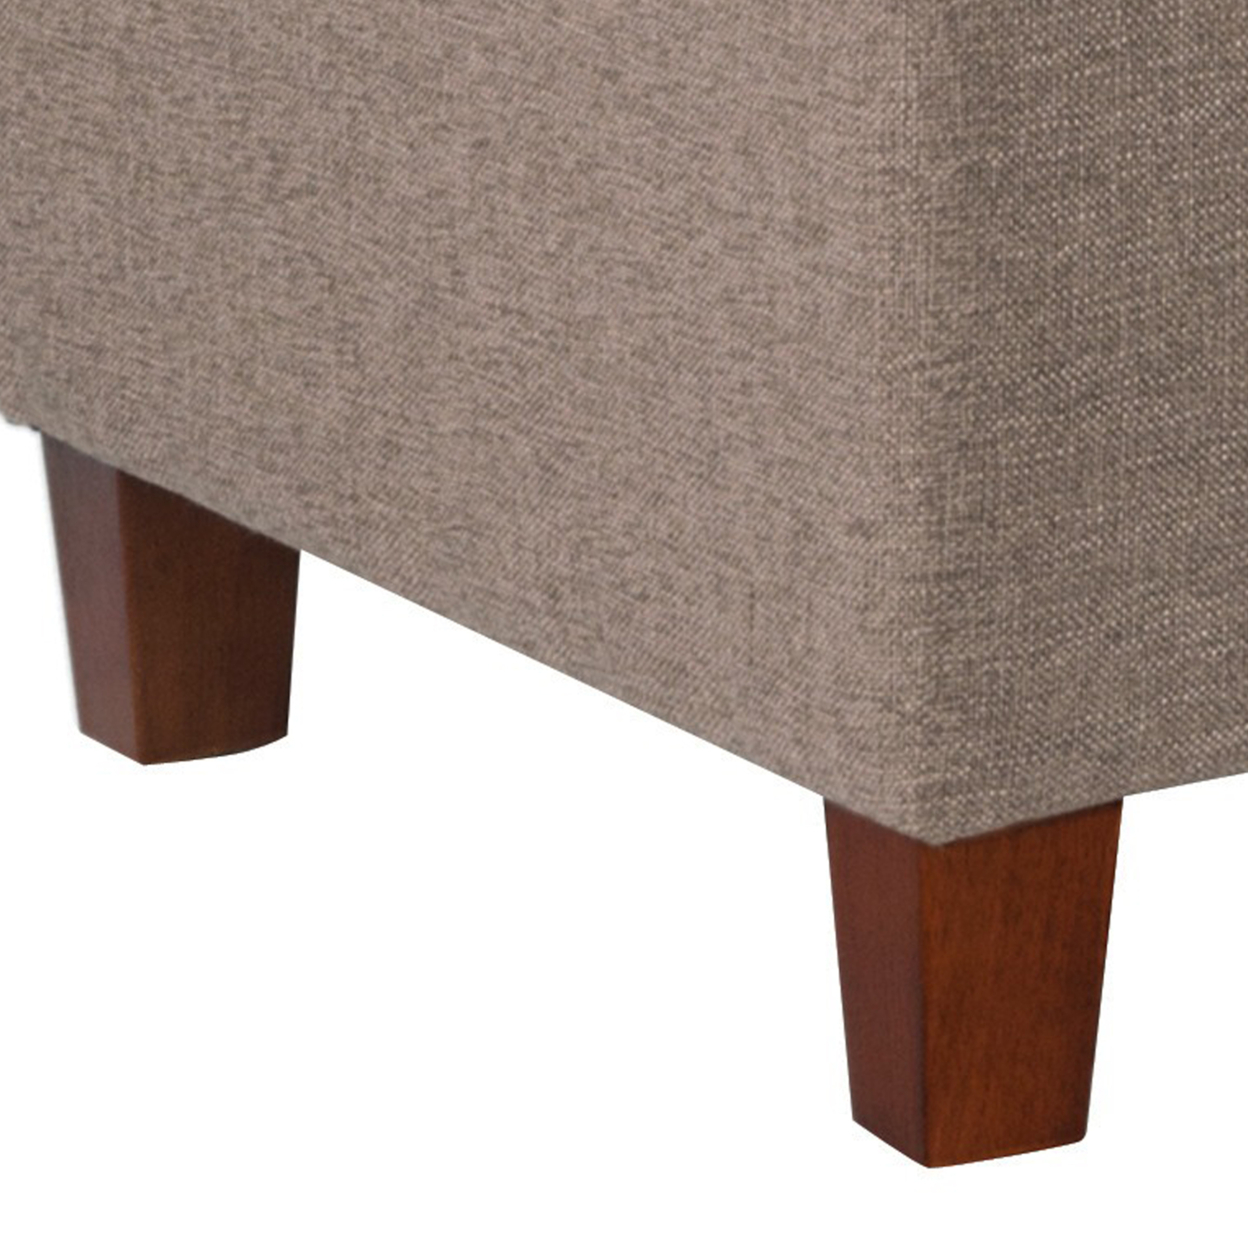 Textured Fabric Upholstered Tufted Wooden Bench With Hinged Storage, Brown- Saltoro Sherpi